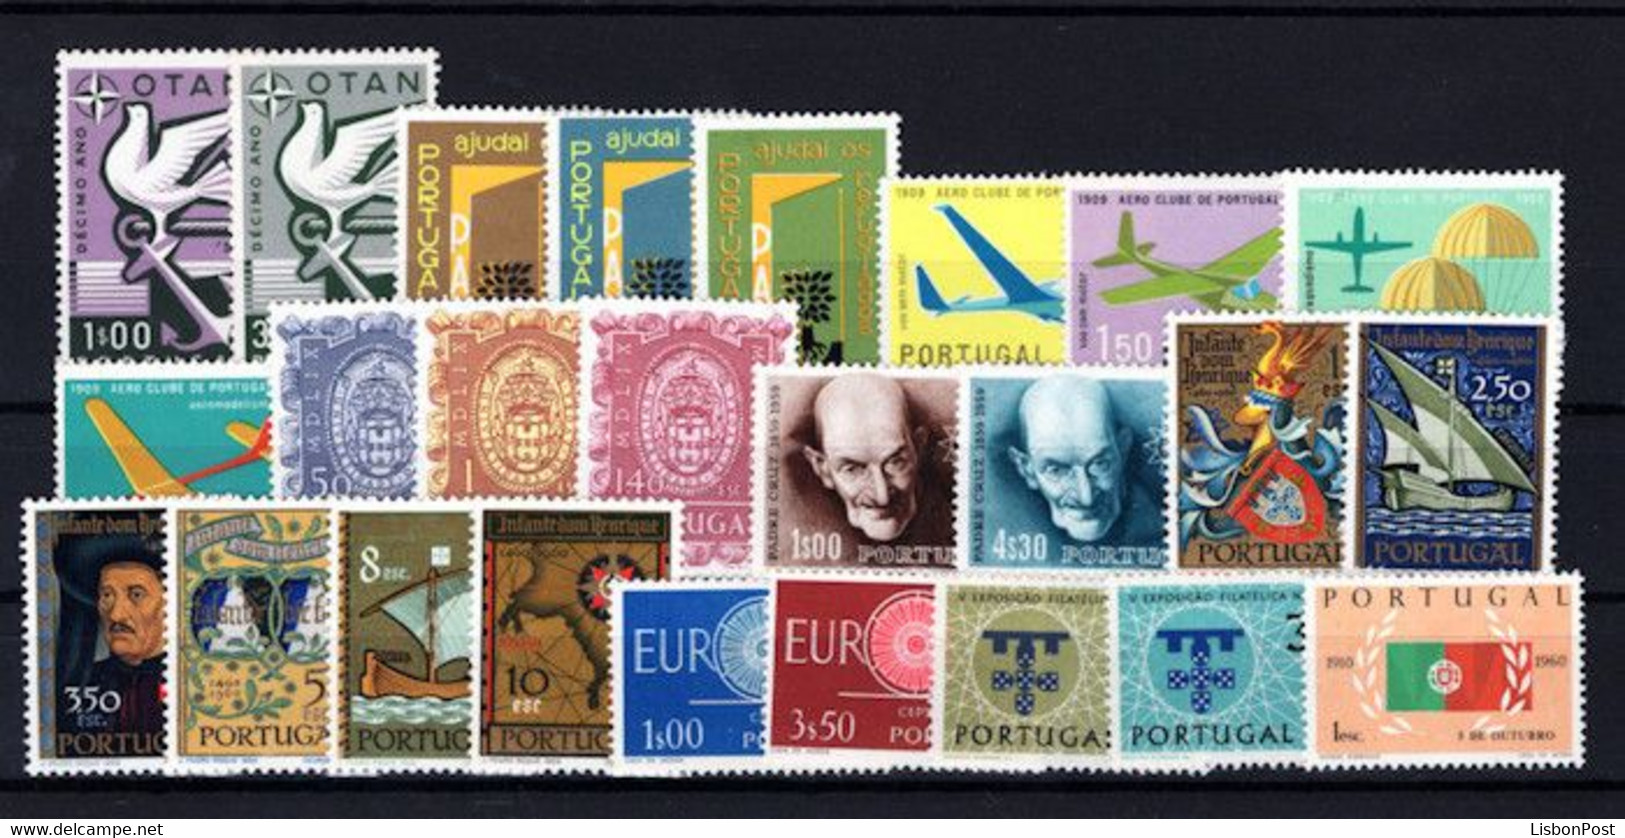 1960 Portugal Azores Madeira Complete Year MNH Stamps. Année Compléte NeufSansCharnière. Ano Completo Novo Sem Charneira - Full Years